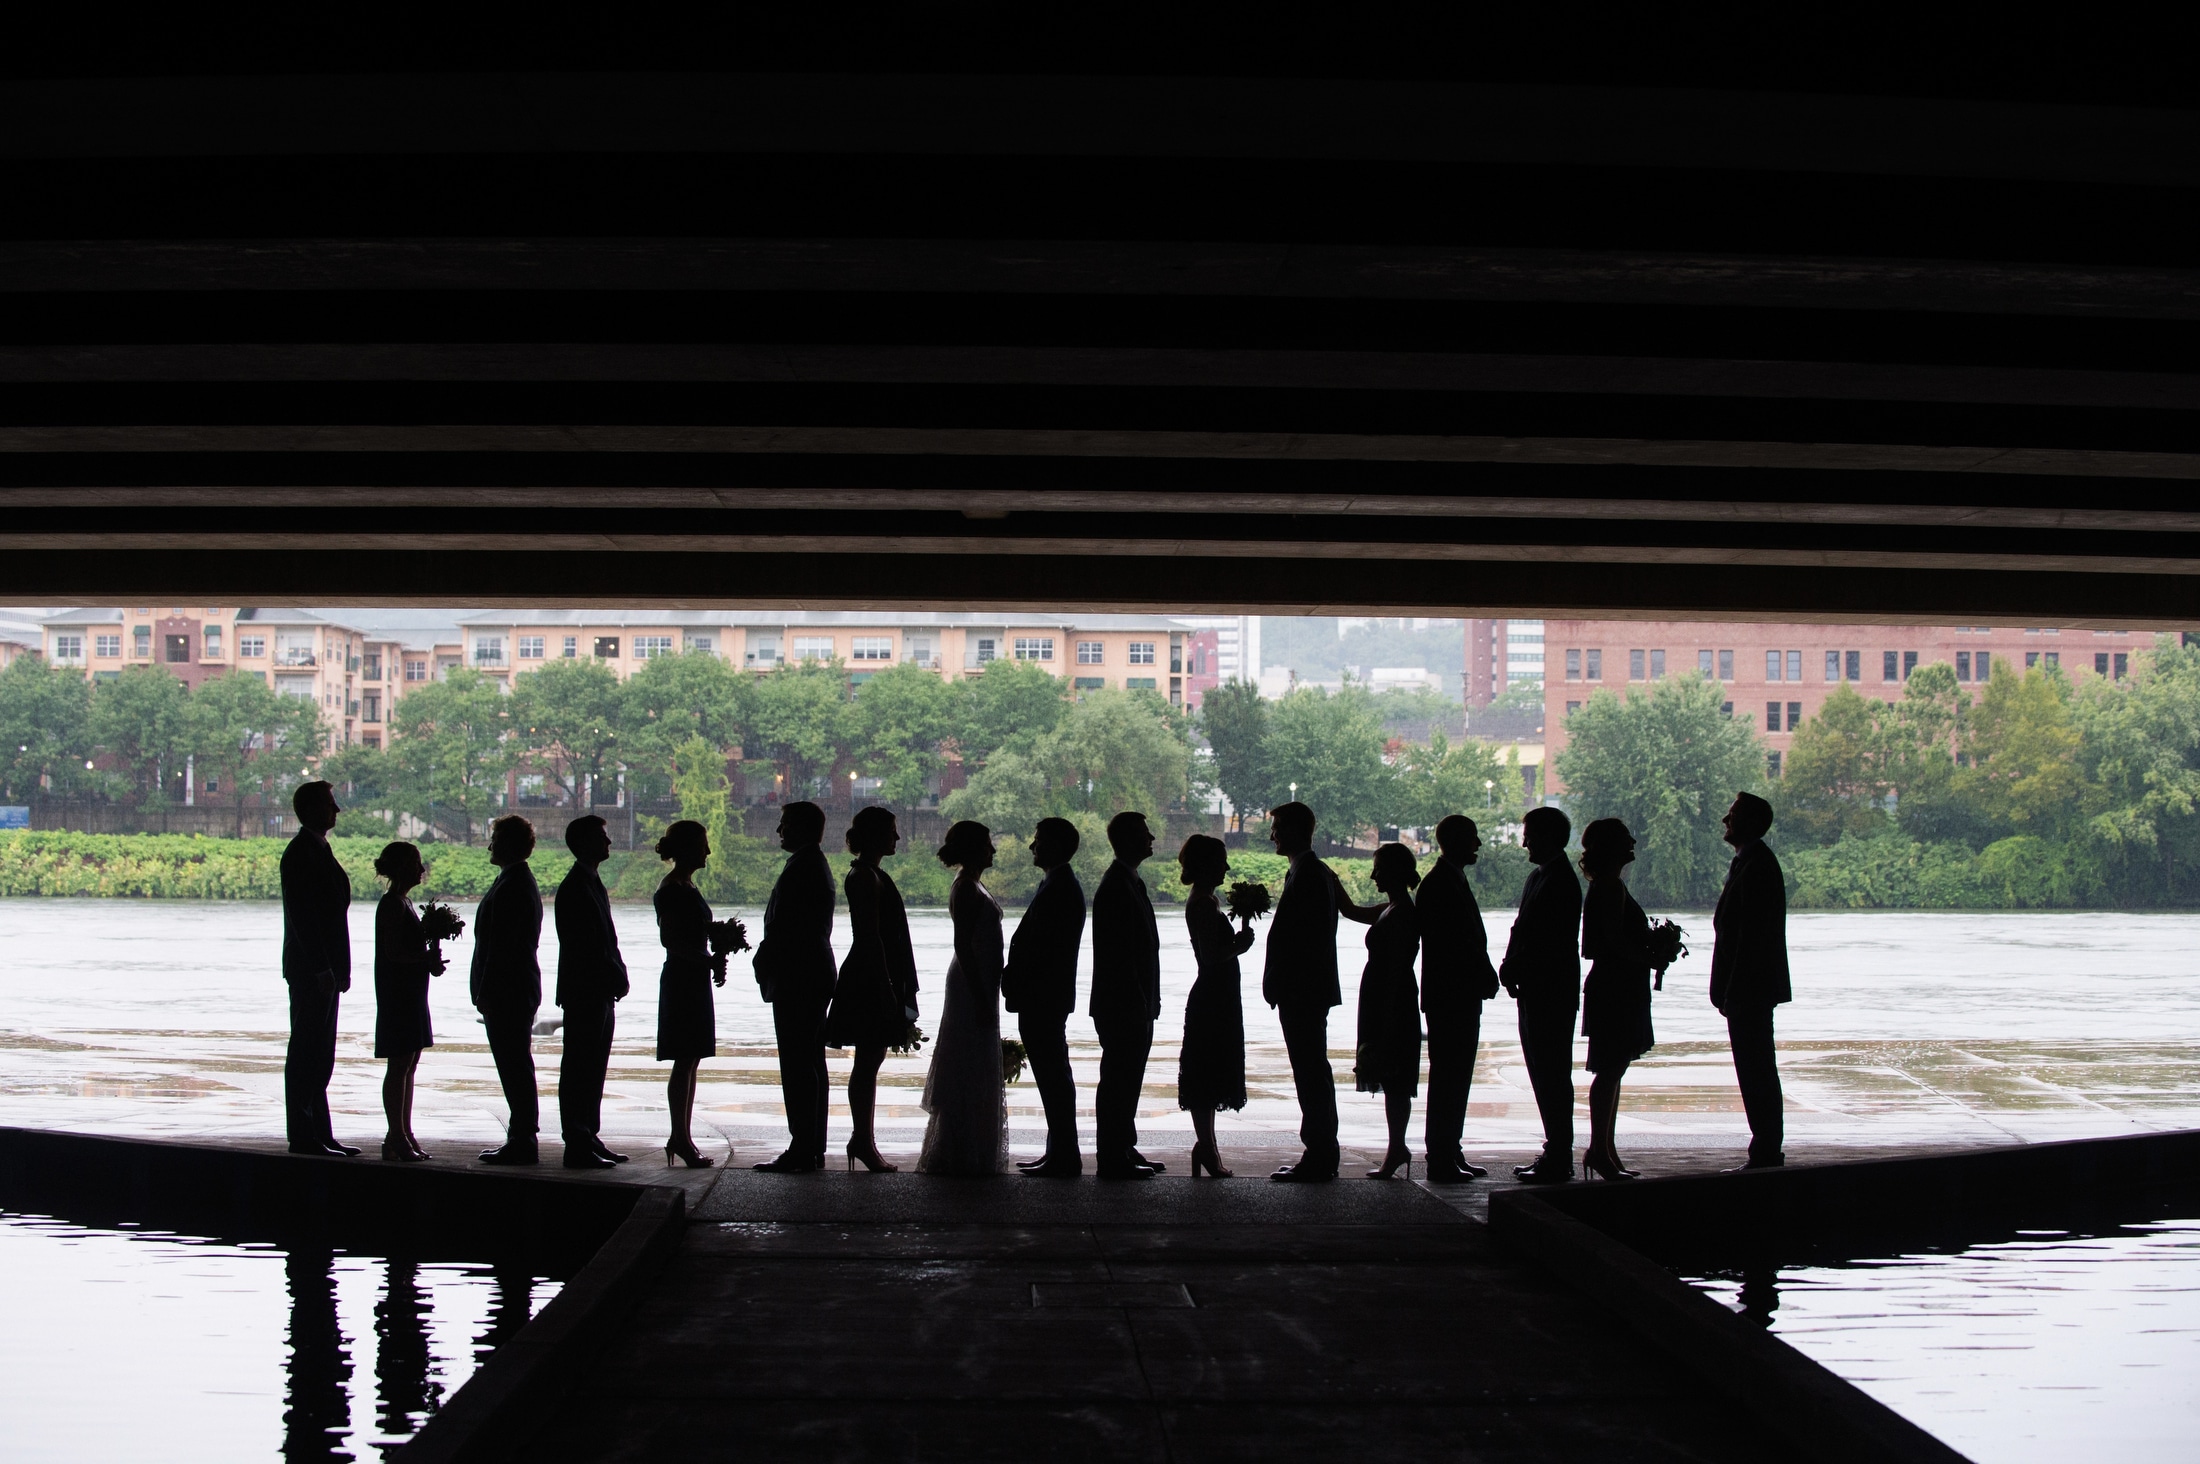 Seventeen members of a bridal party stand in silhouette beneath the convention center as they take wedding photos in the rain.